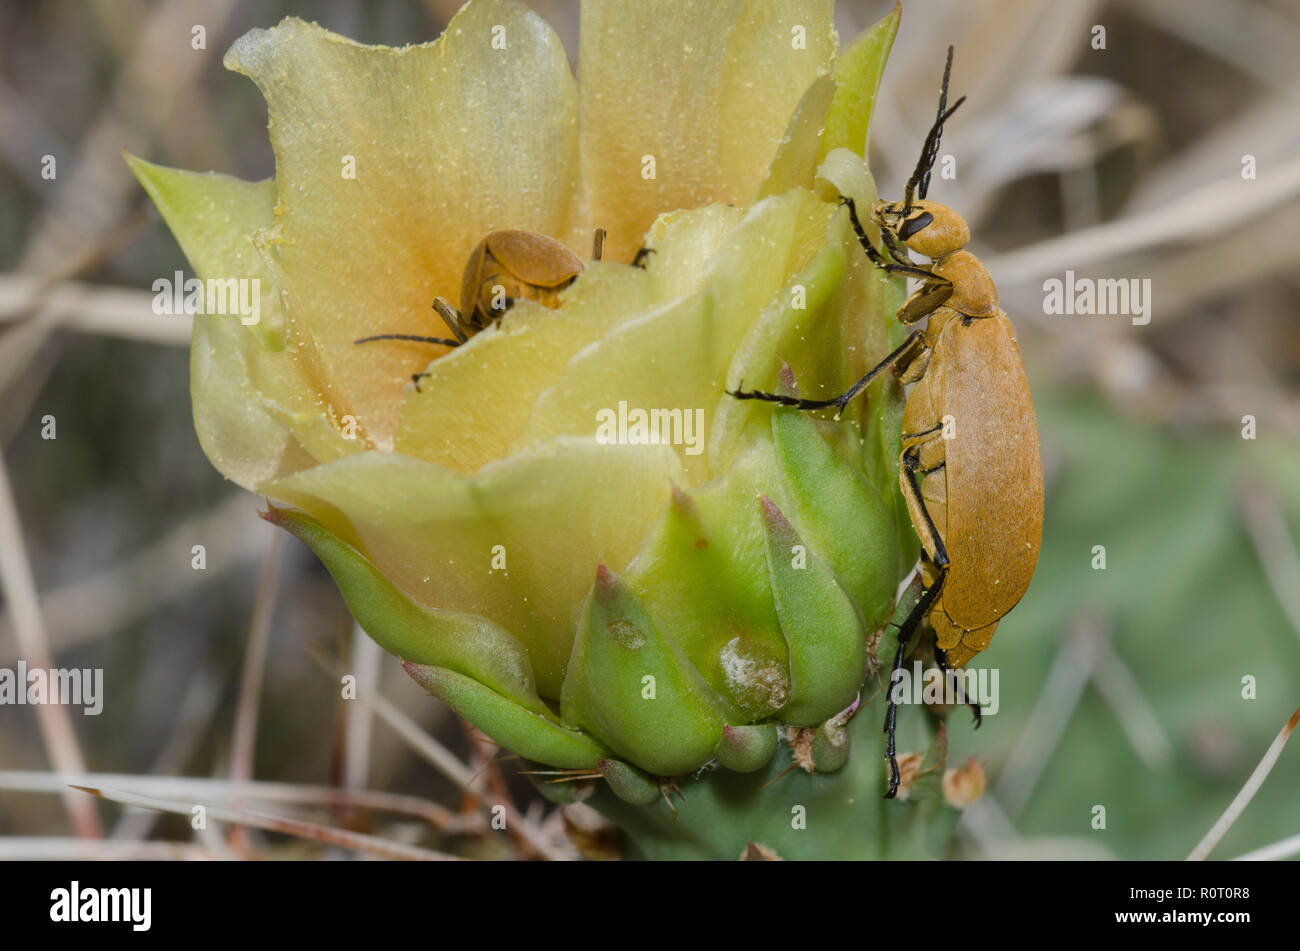 Blister Beetle, Epicauta immaculata, on prickly pear, Opuntia phaeacantha, blossom Stock Photo